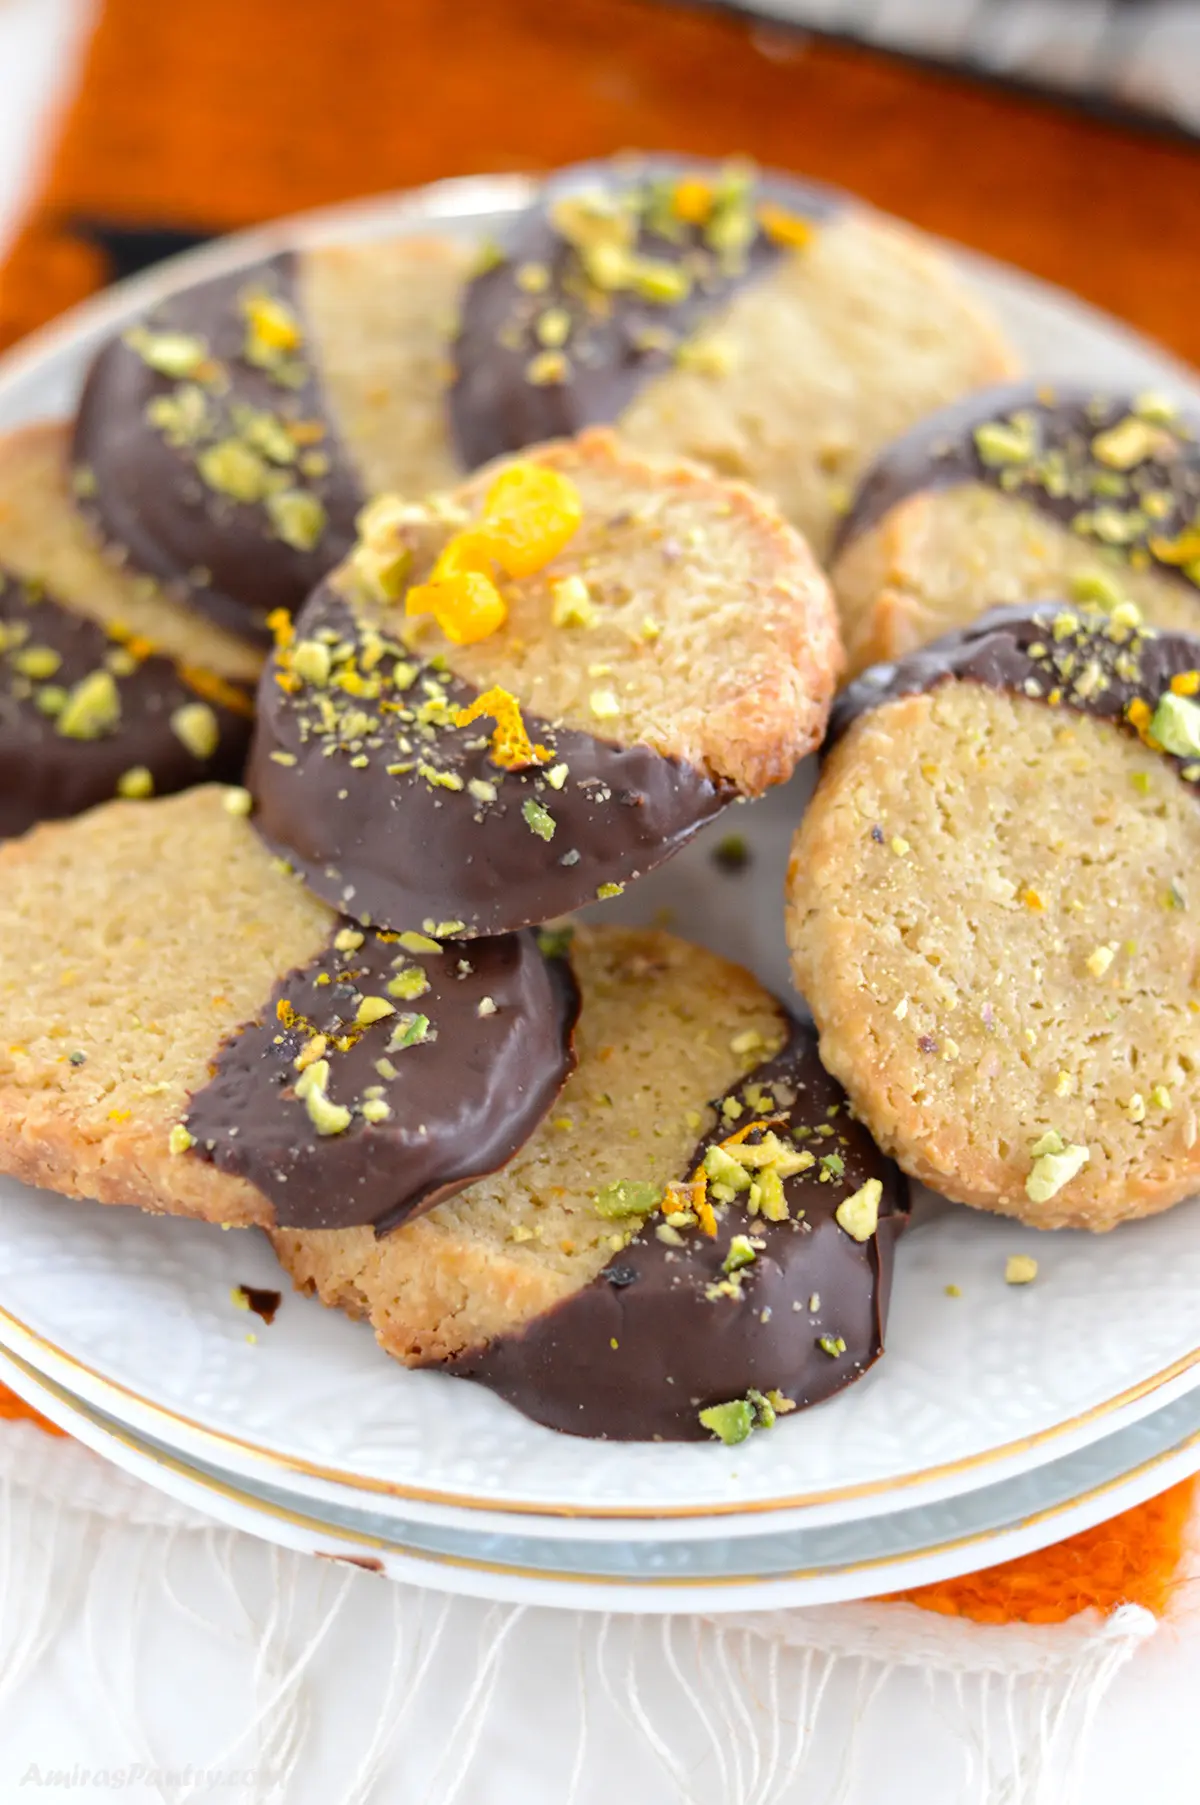 Chocolate orange cookies garnished with pistachios.